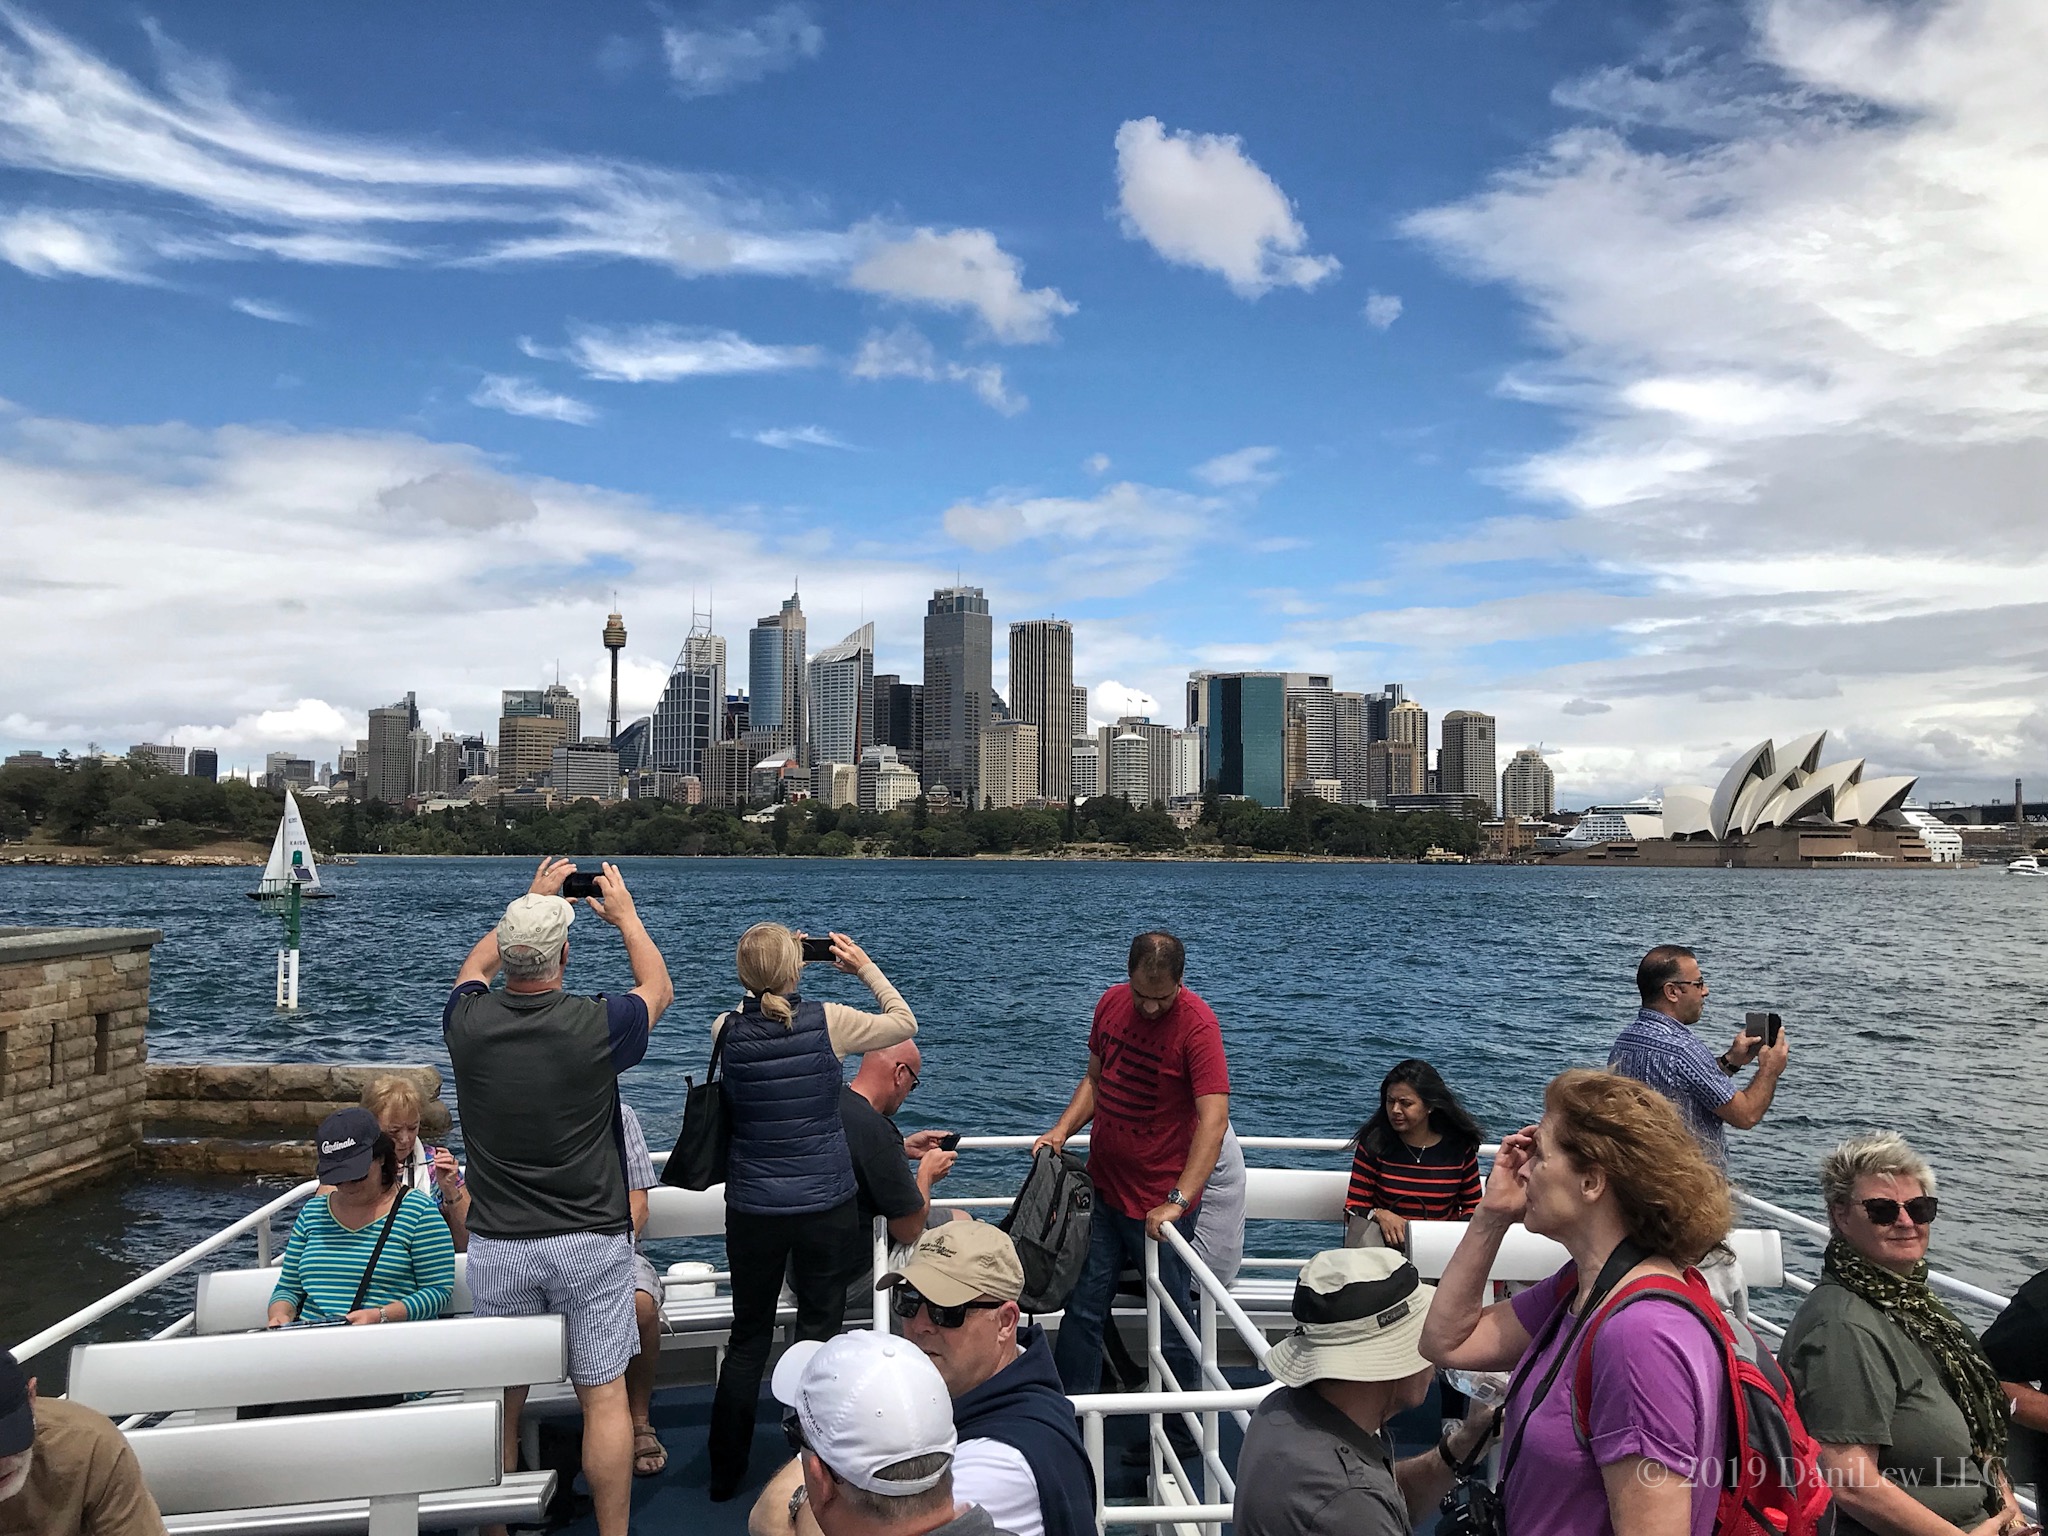 Sydney Harbor view from Ft Denison - image taken with an iPhone 7